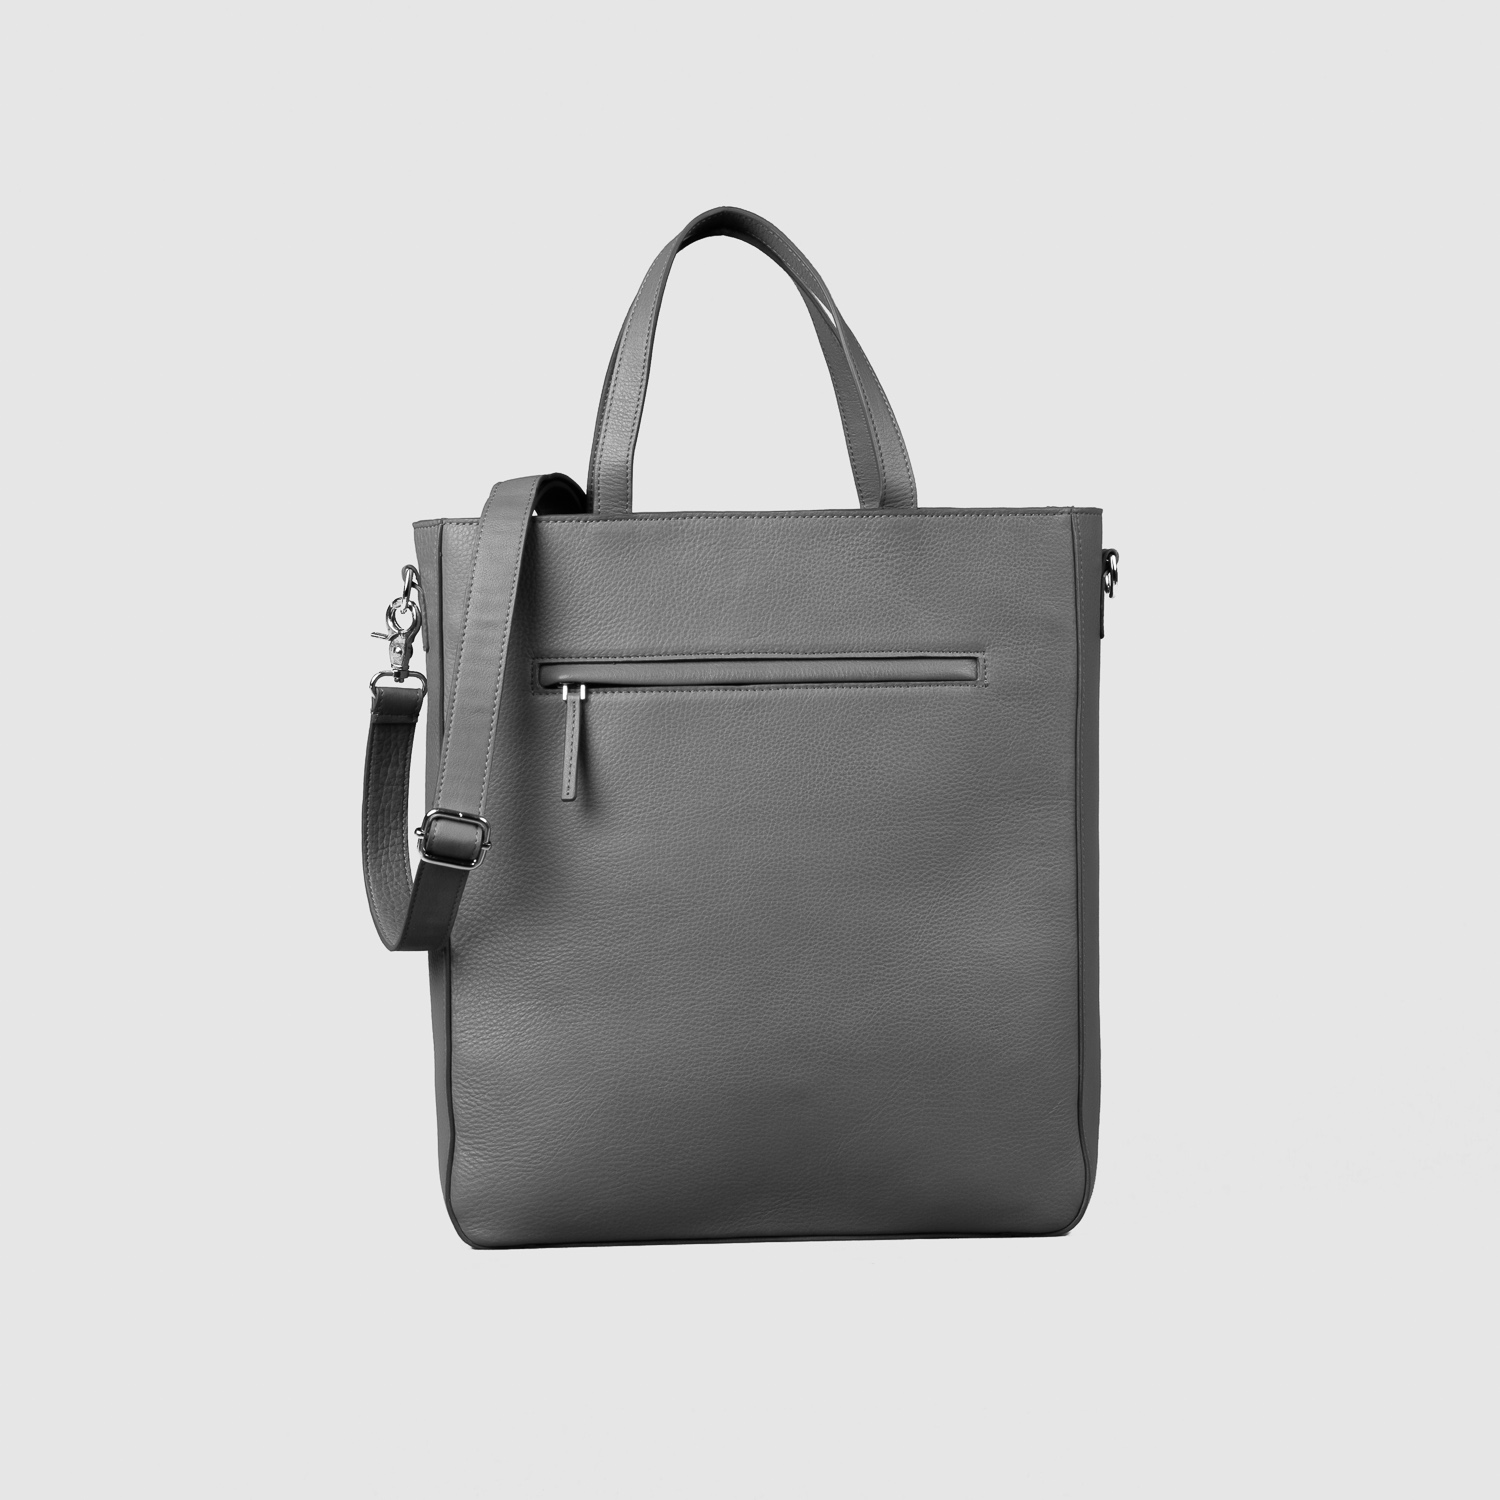 The Poet Grey Leather Tote Bag
